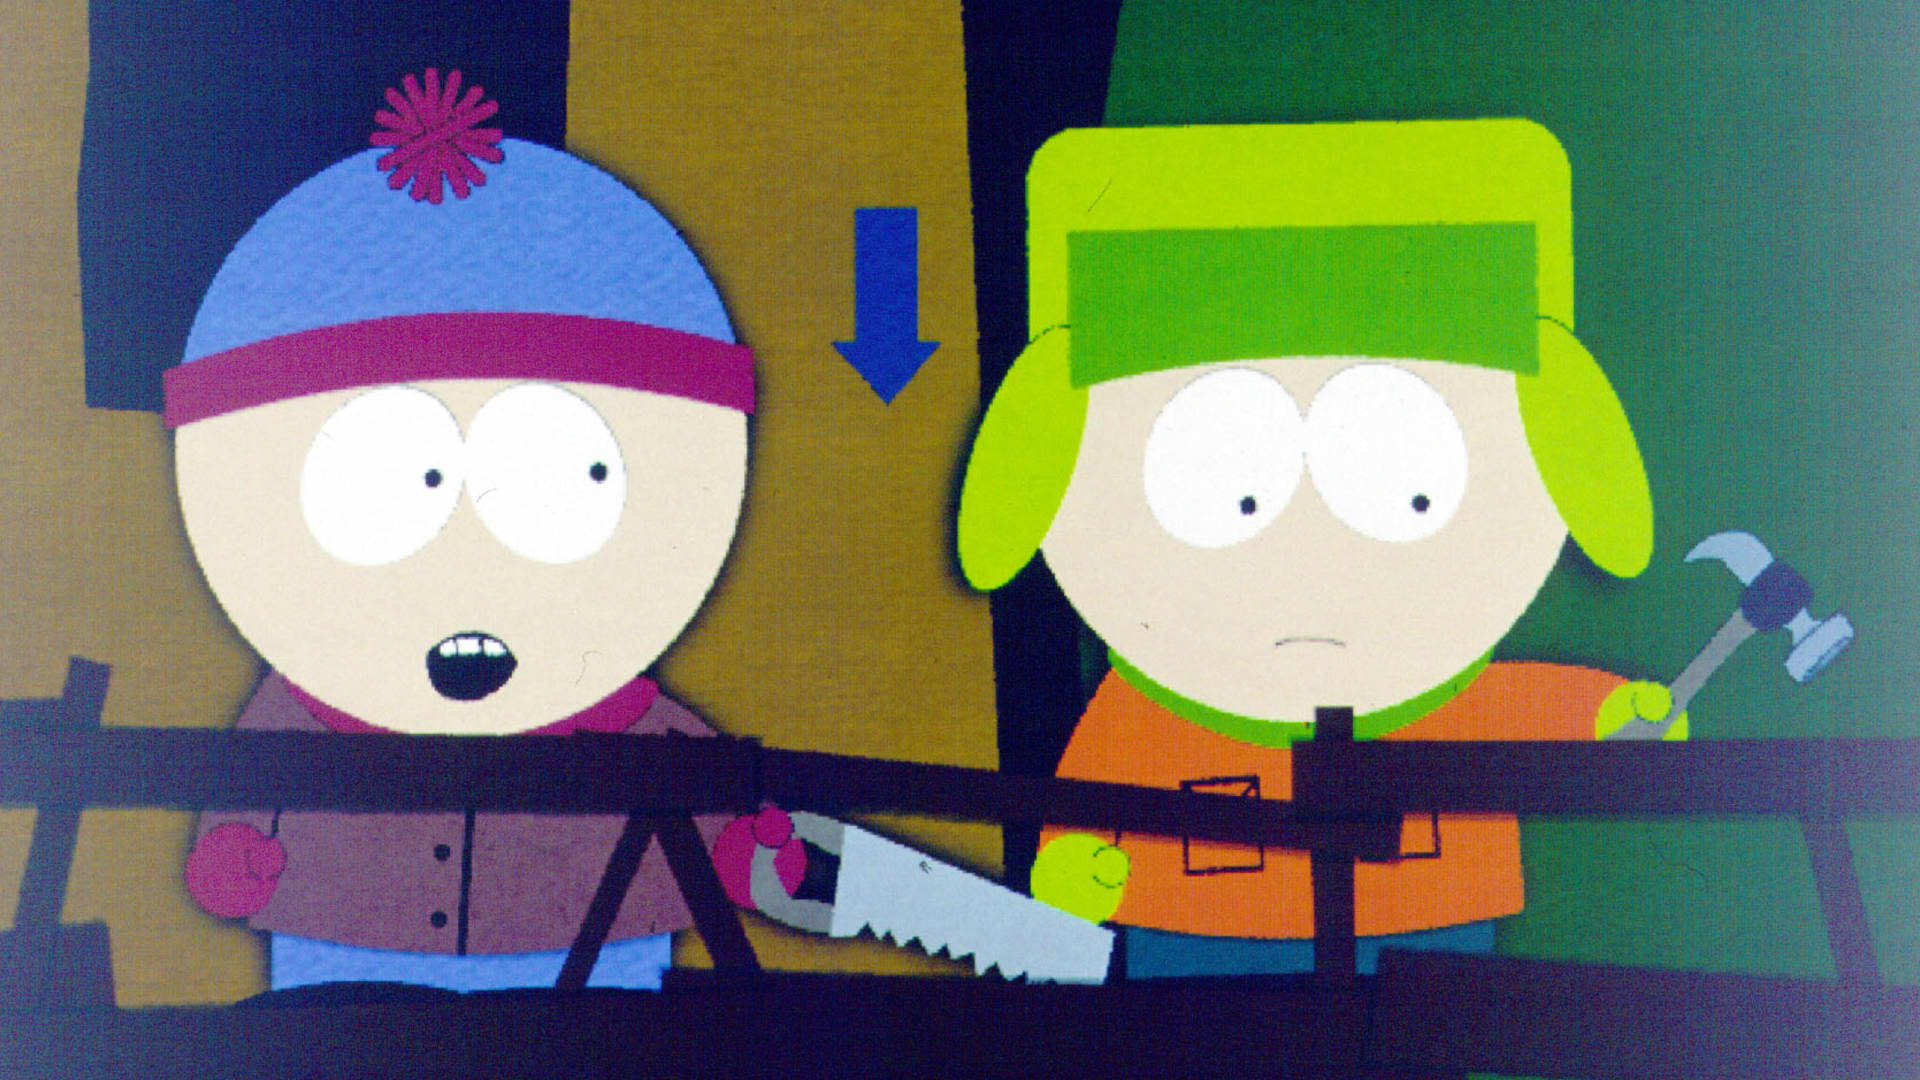 Judge sides with Paramount on claims in South Park lawsuit